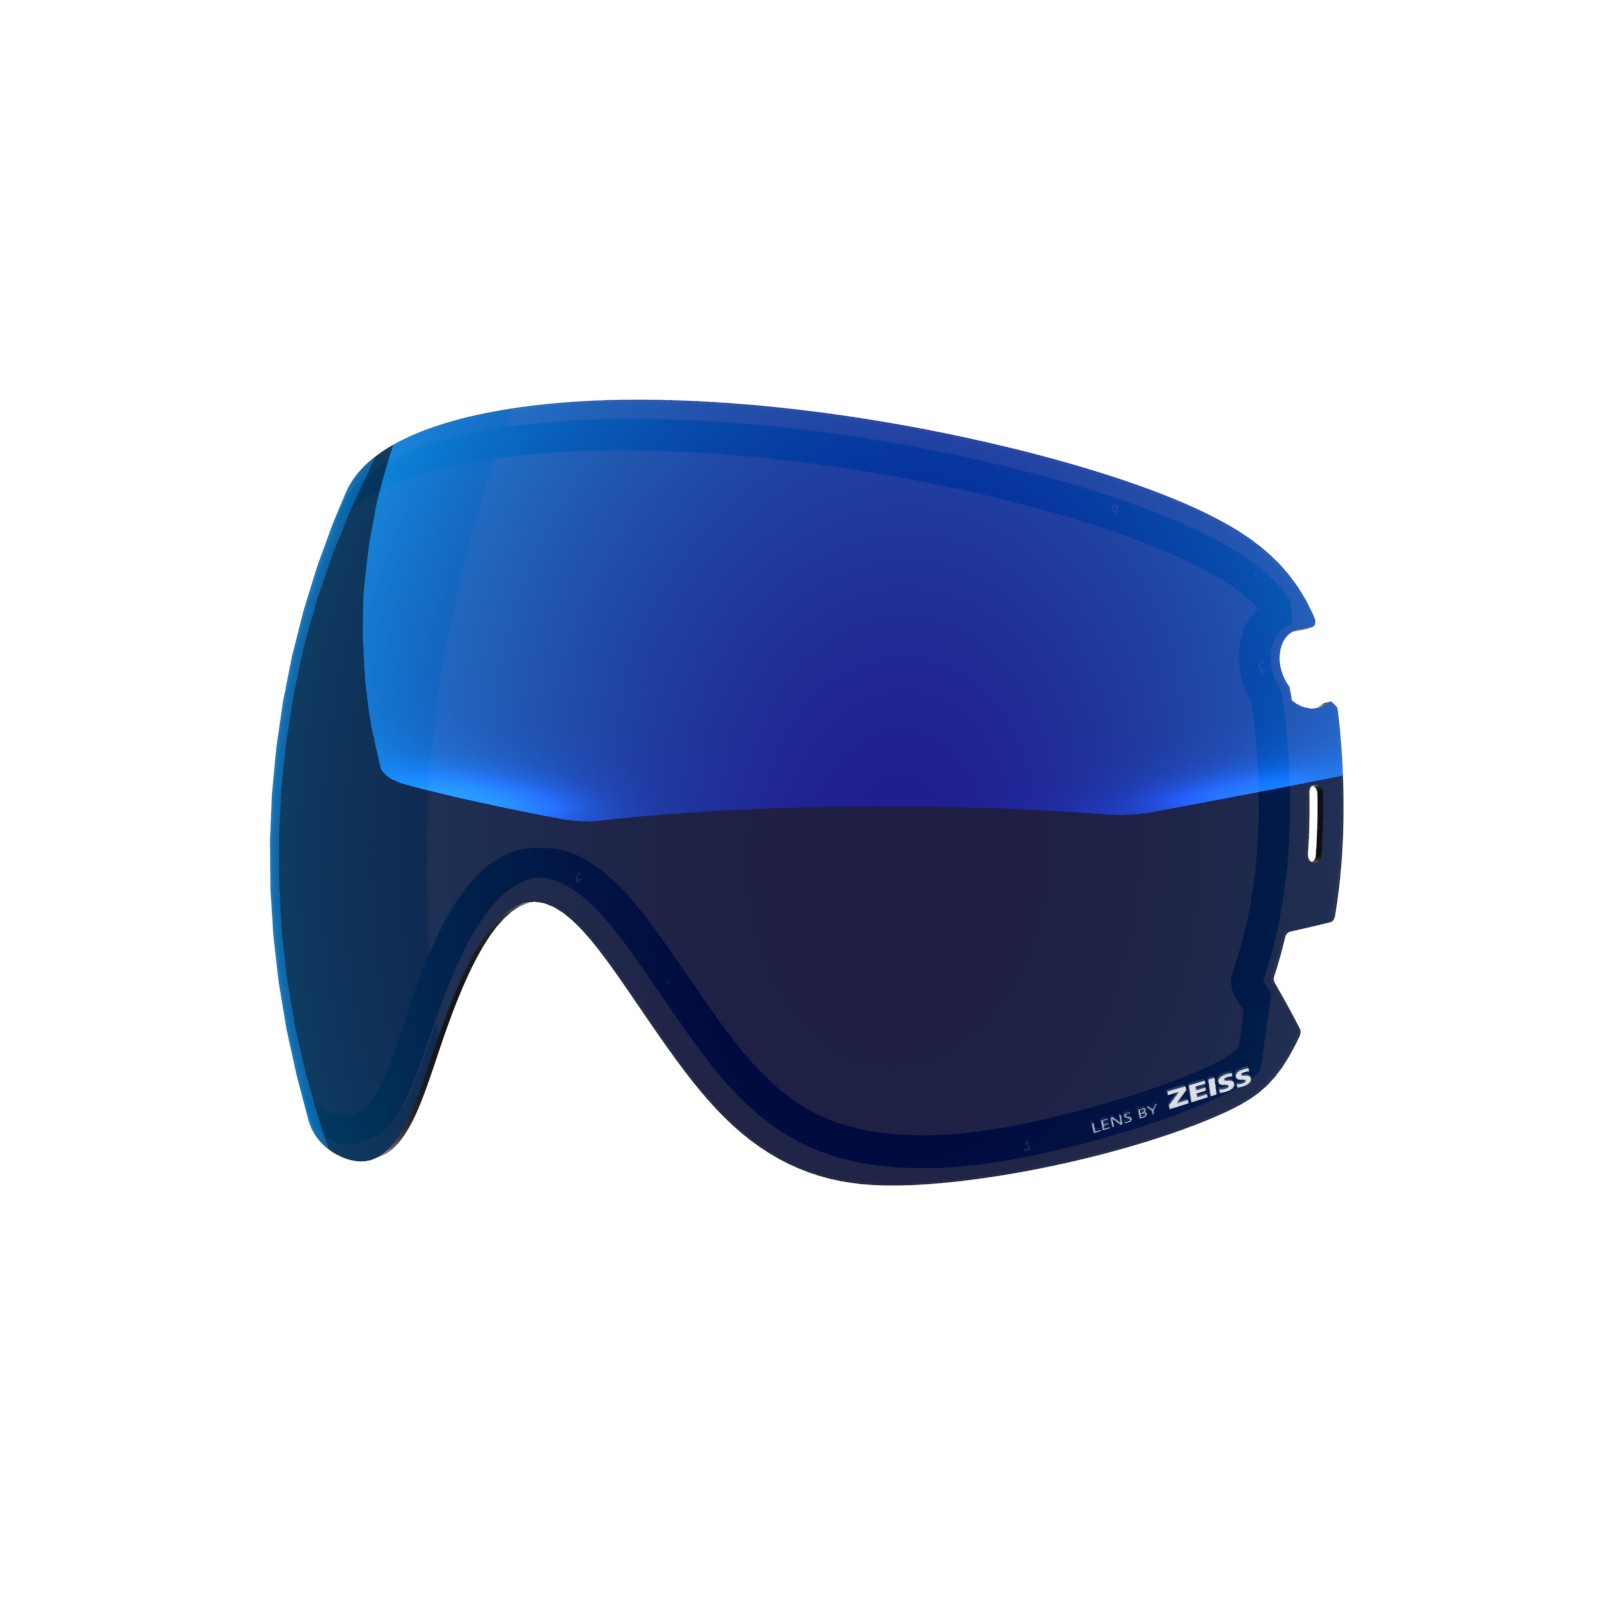 Blue MCI lens for Open XL goggle